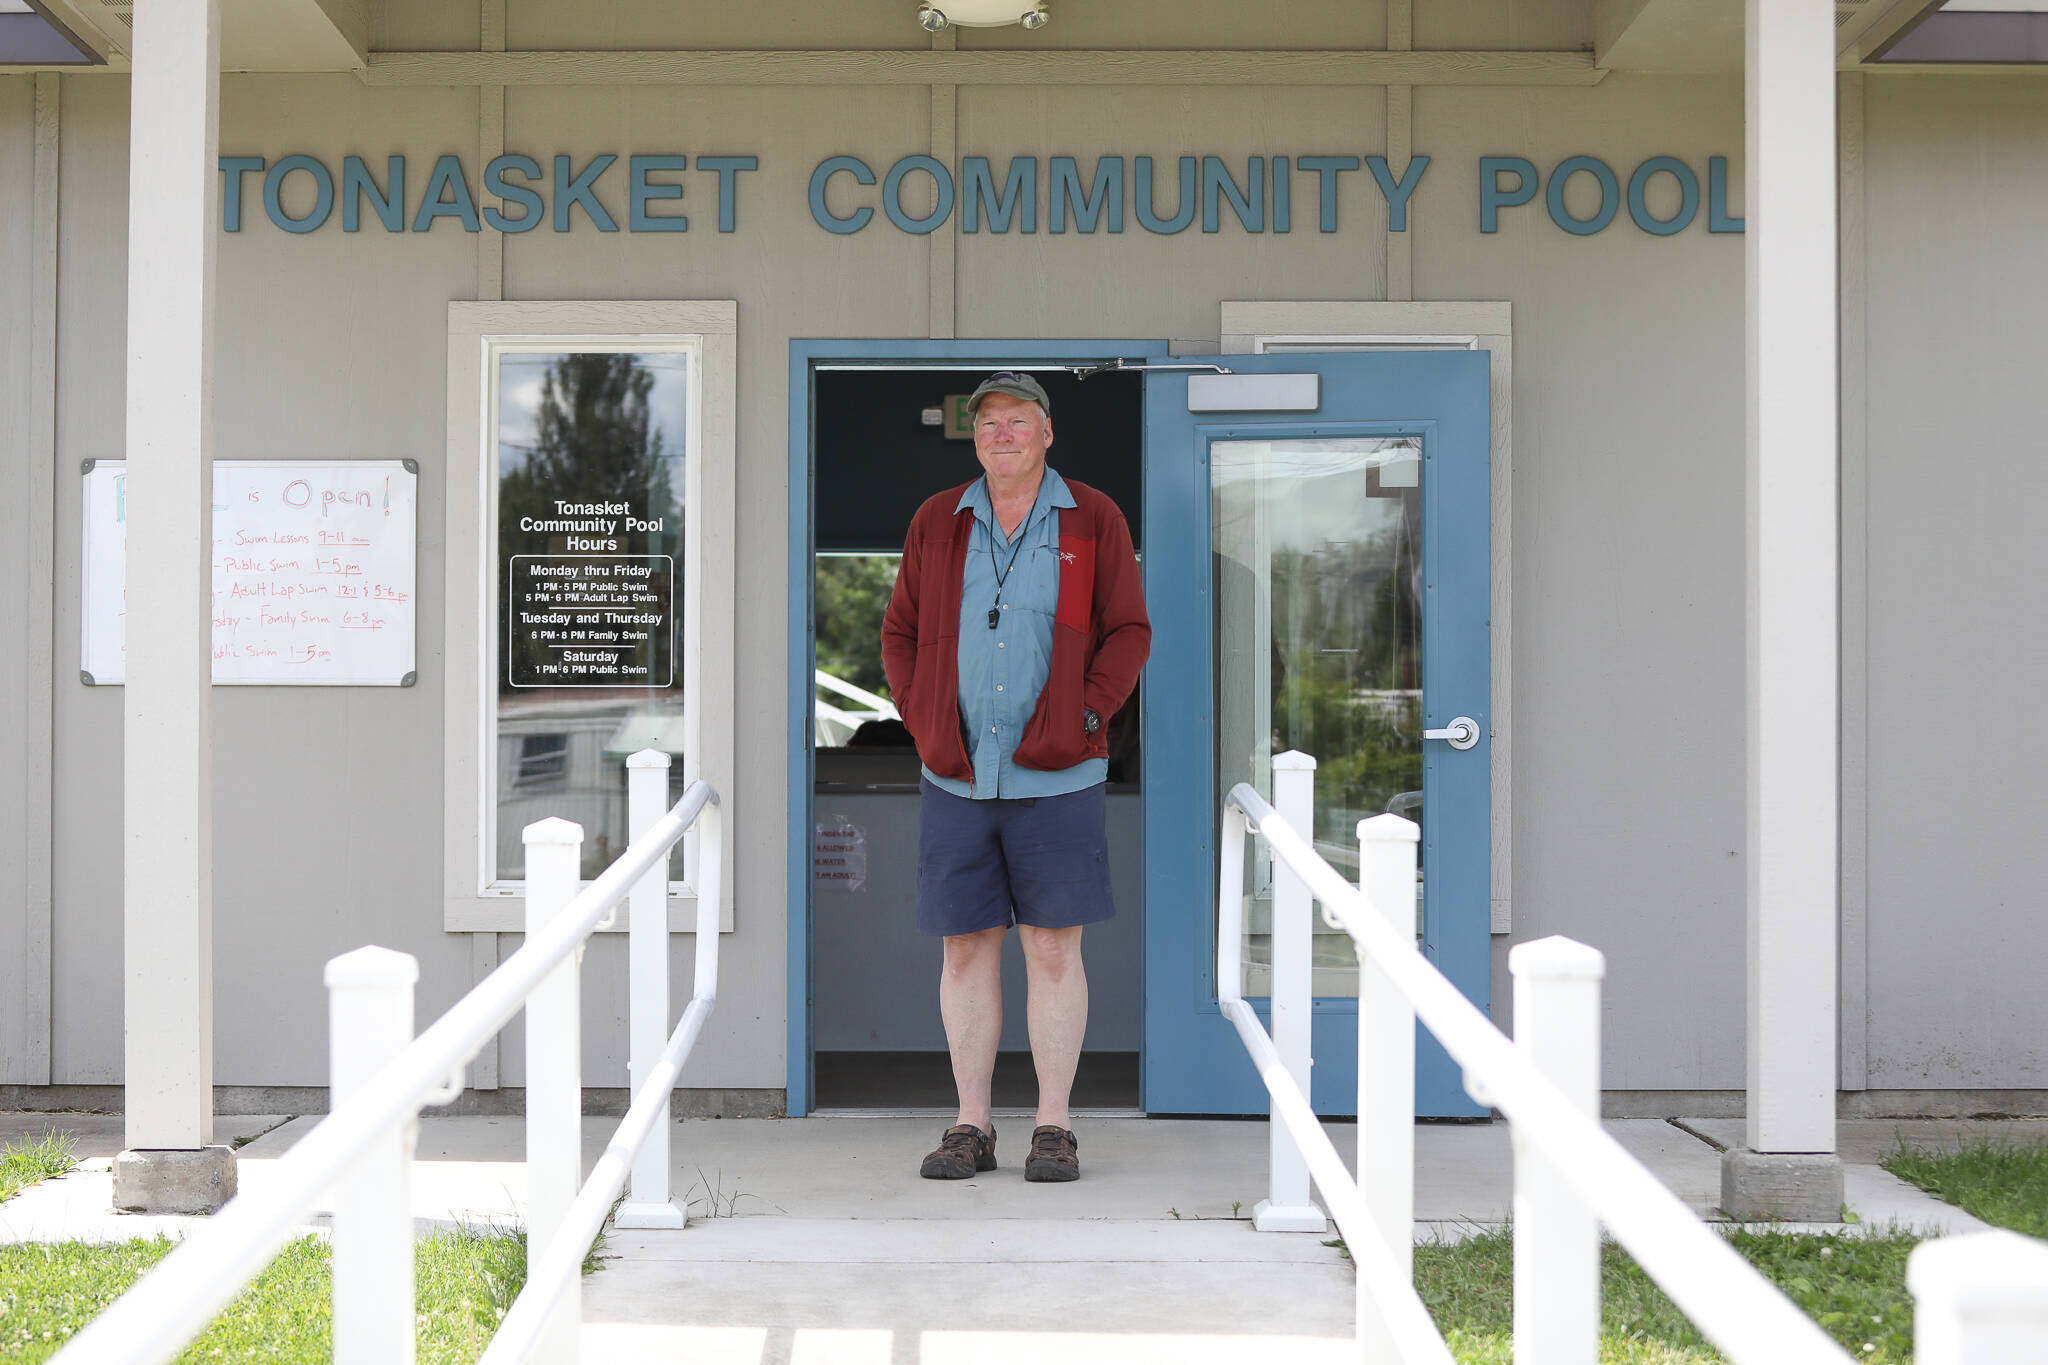 Laura Knowlton/staff photo
This summer, James Moore will serve as the new pool manager for the Tonasket City Pool. The pool opened Monday, June 12.